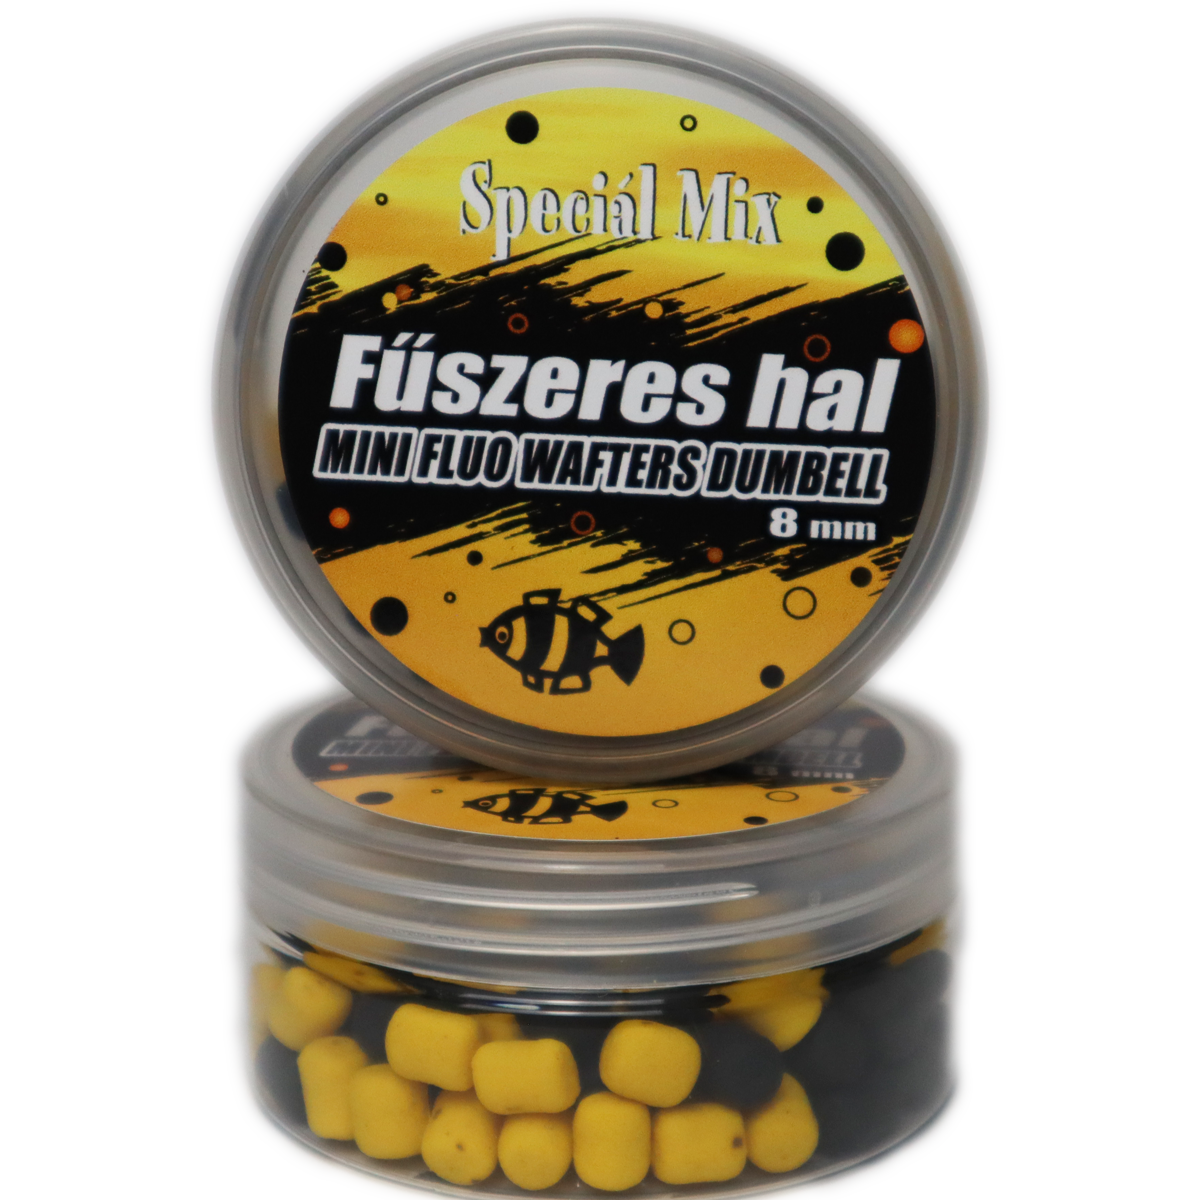 8 mm FŰSZERES HAL Fluo Wafters Dumbell